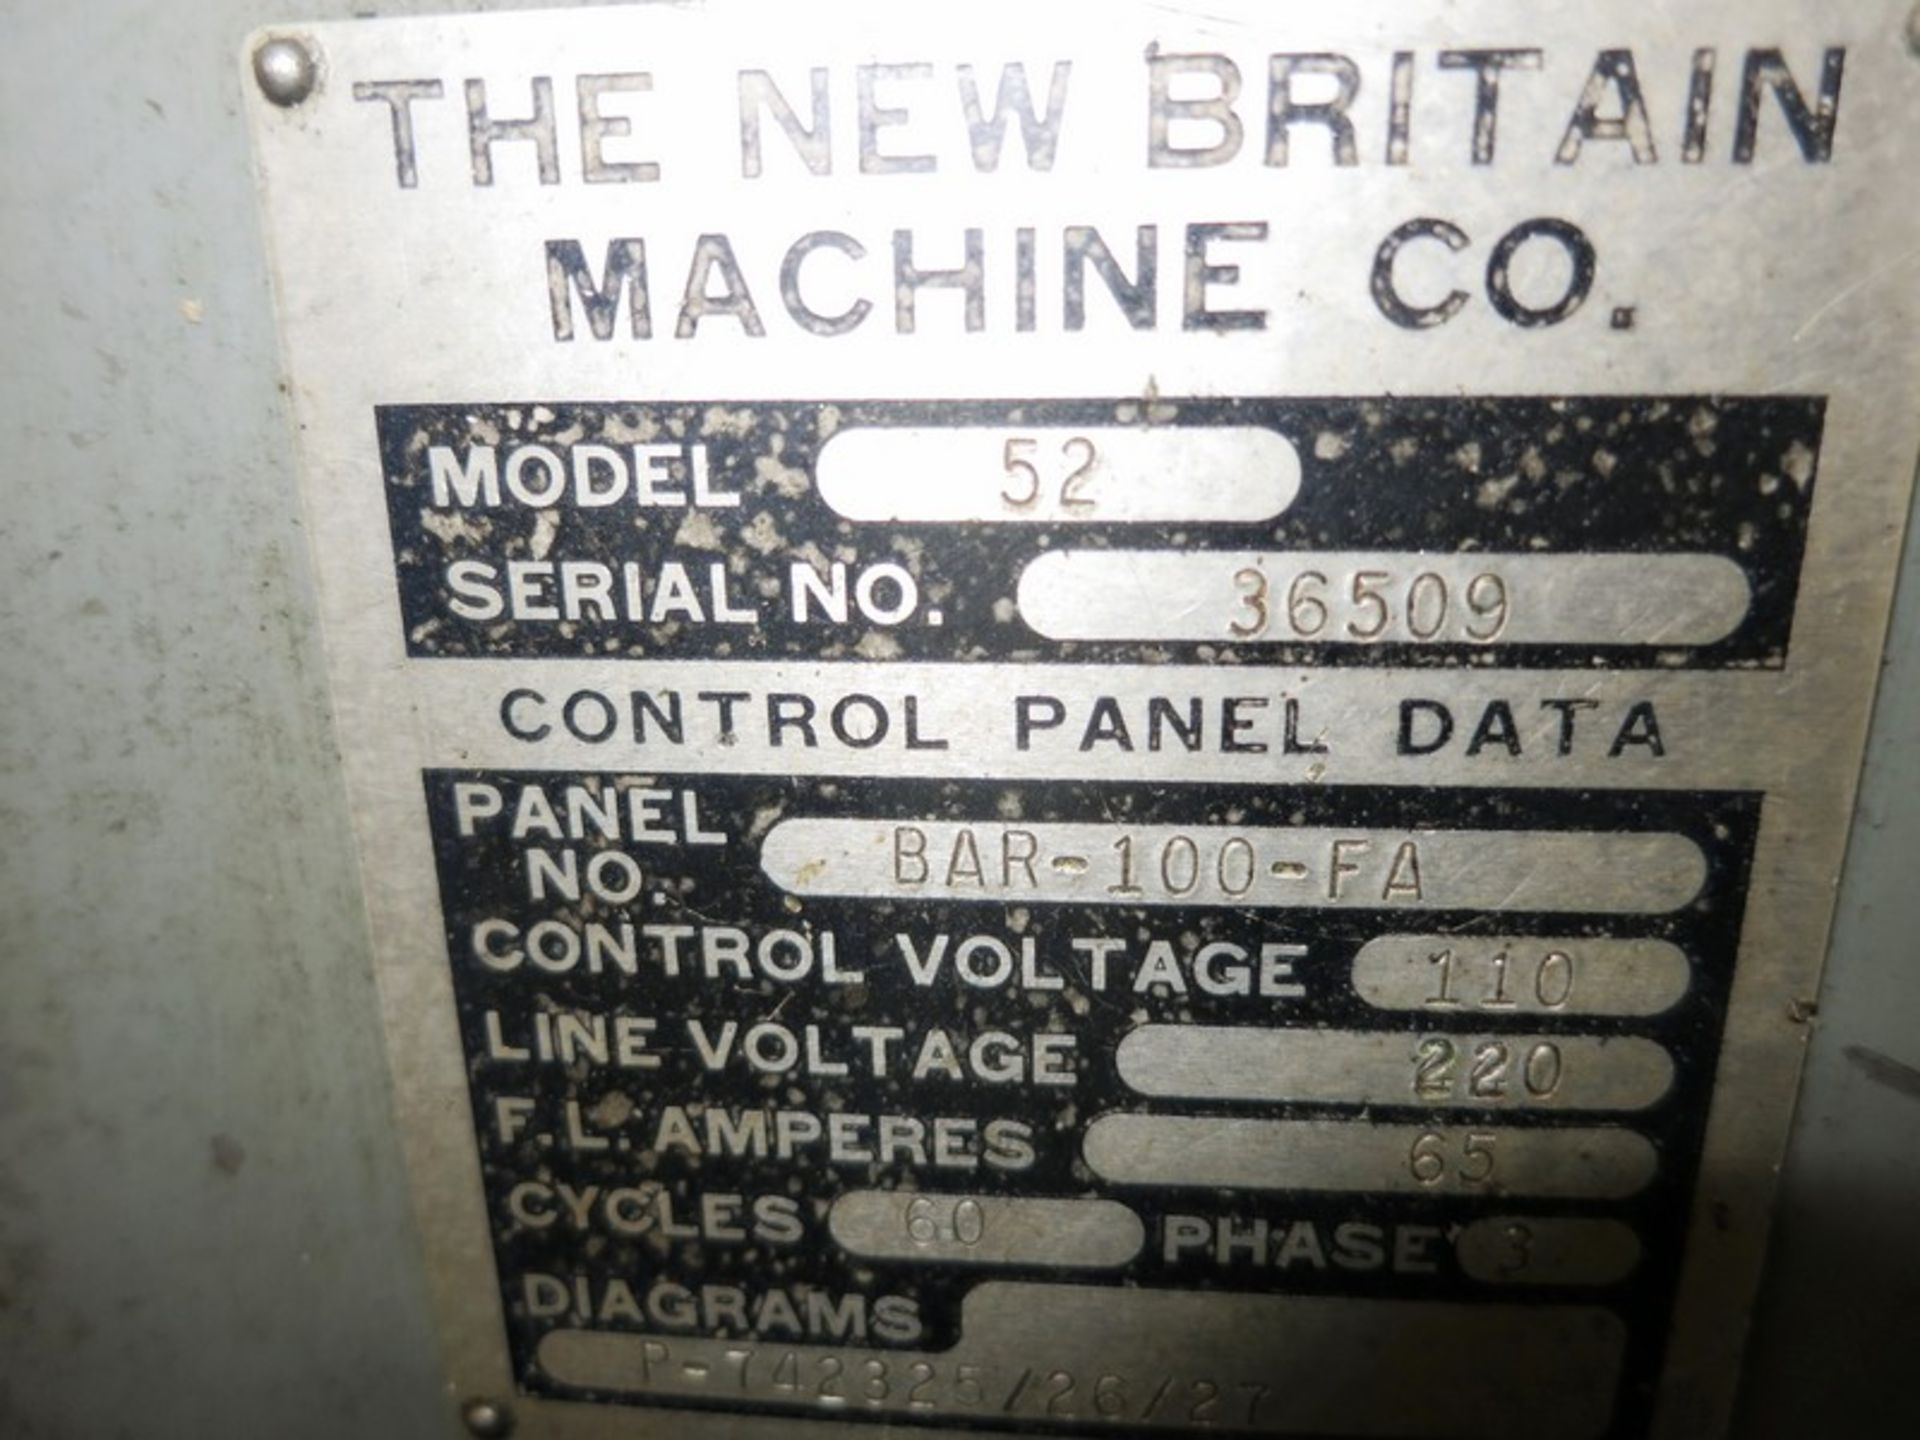 1 1/4" New Britain Model 52 6 Spindle Automatic Screw Machine, S/N 36509, New 1970 - Image 7 of 7